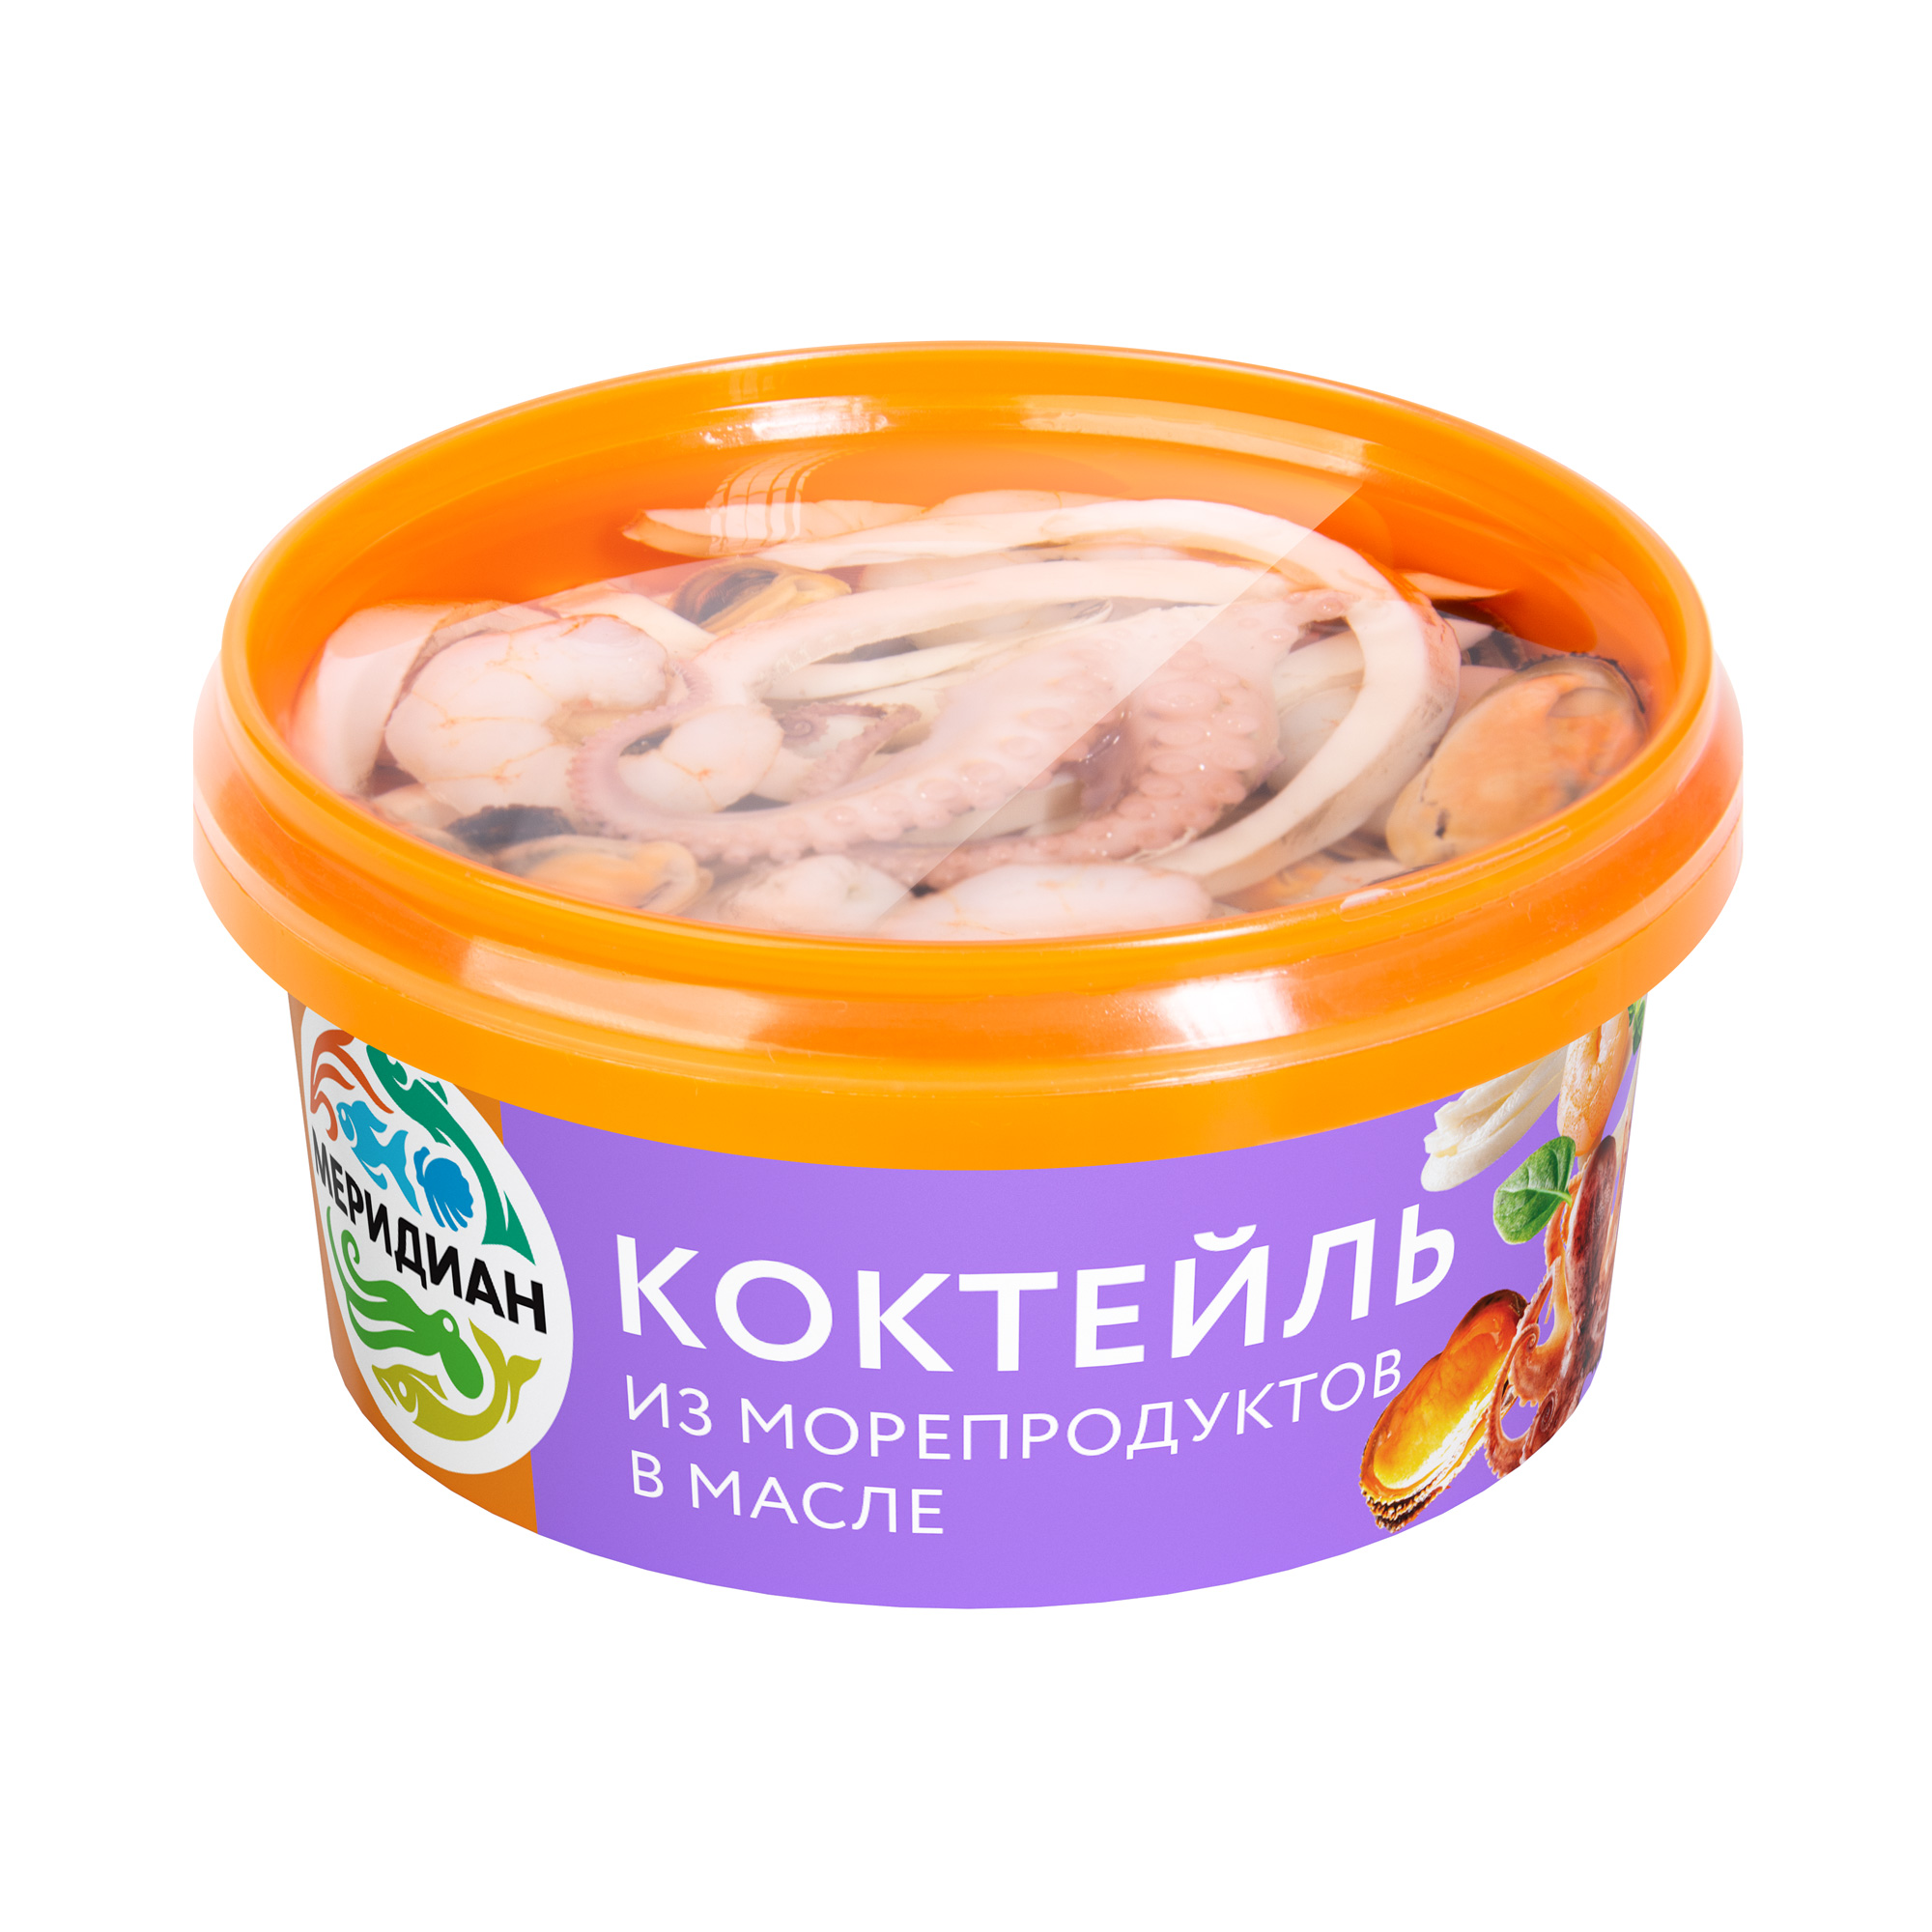 Seafood cocktail in oil, 180 g